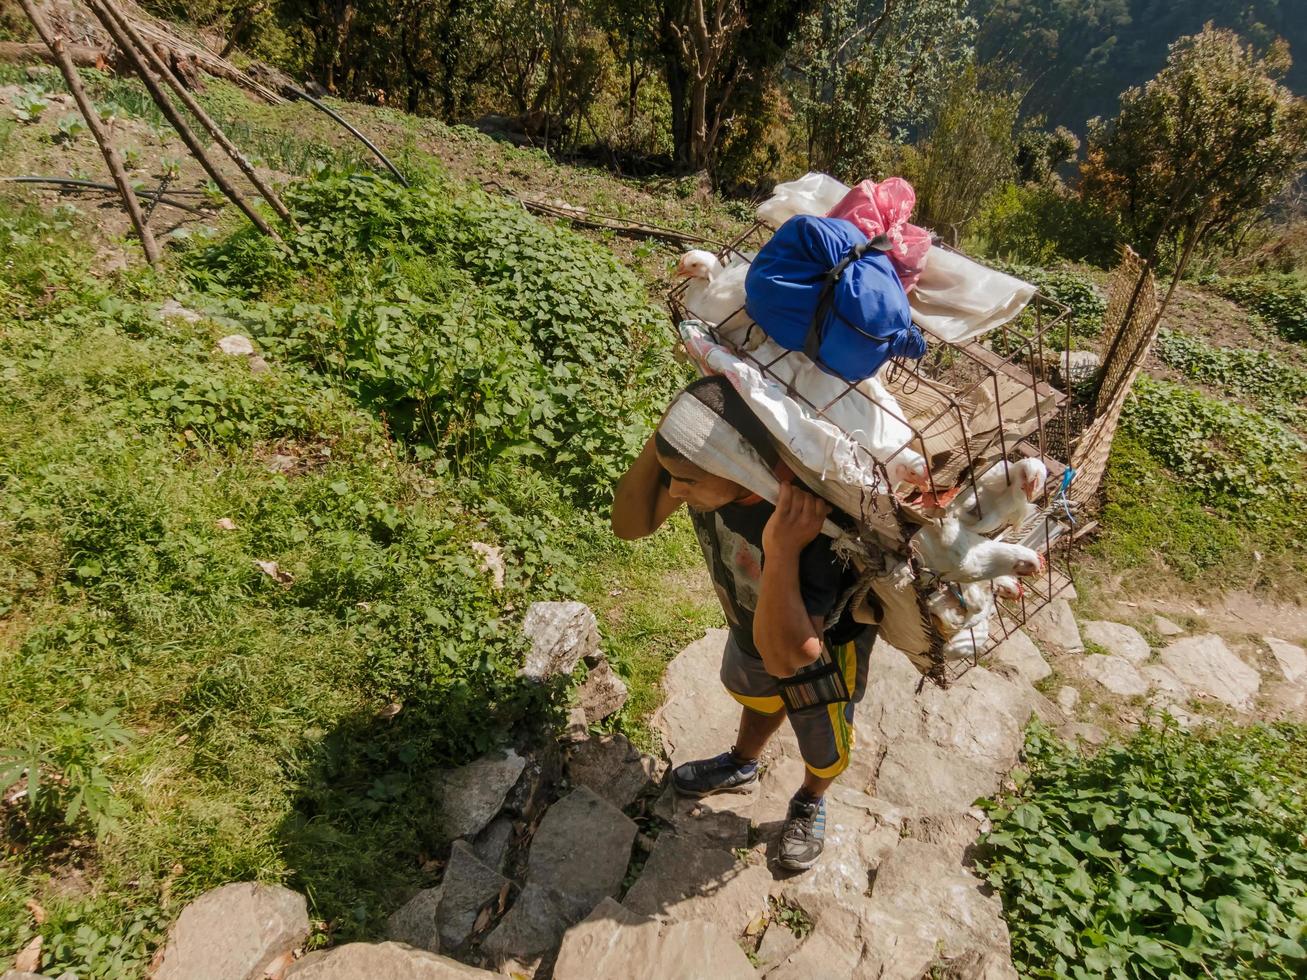 Chhomrong, Nepal - April 2015. A Nepali porter carries a wire mesh basket of poultry on his back up the steep stairs of a hillside on the Annapurna Base Camp trail in the Nepal Himalayas. photo